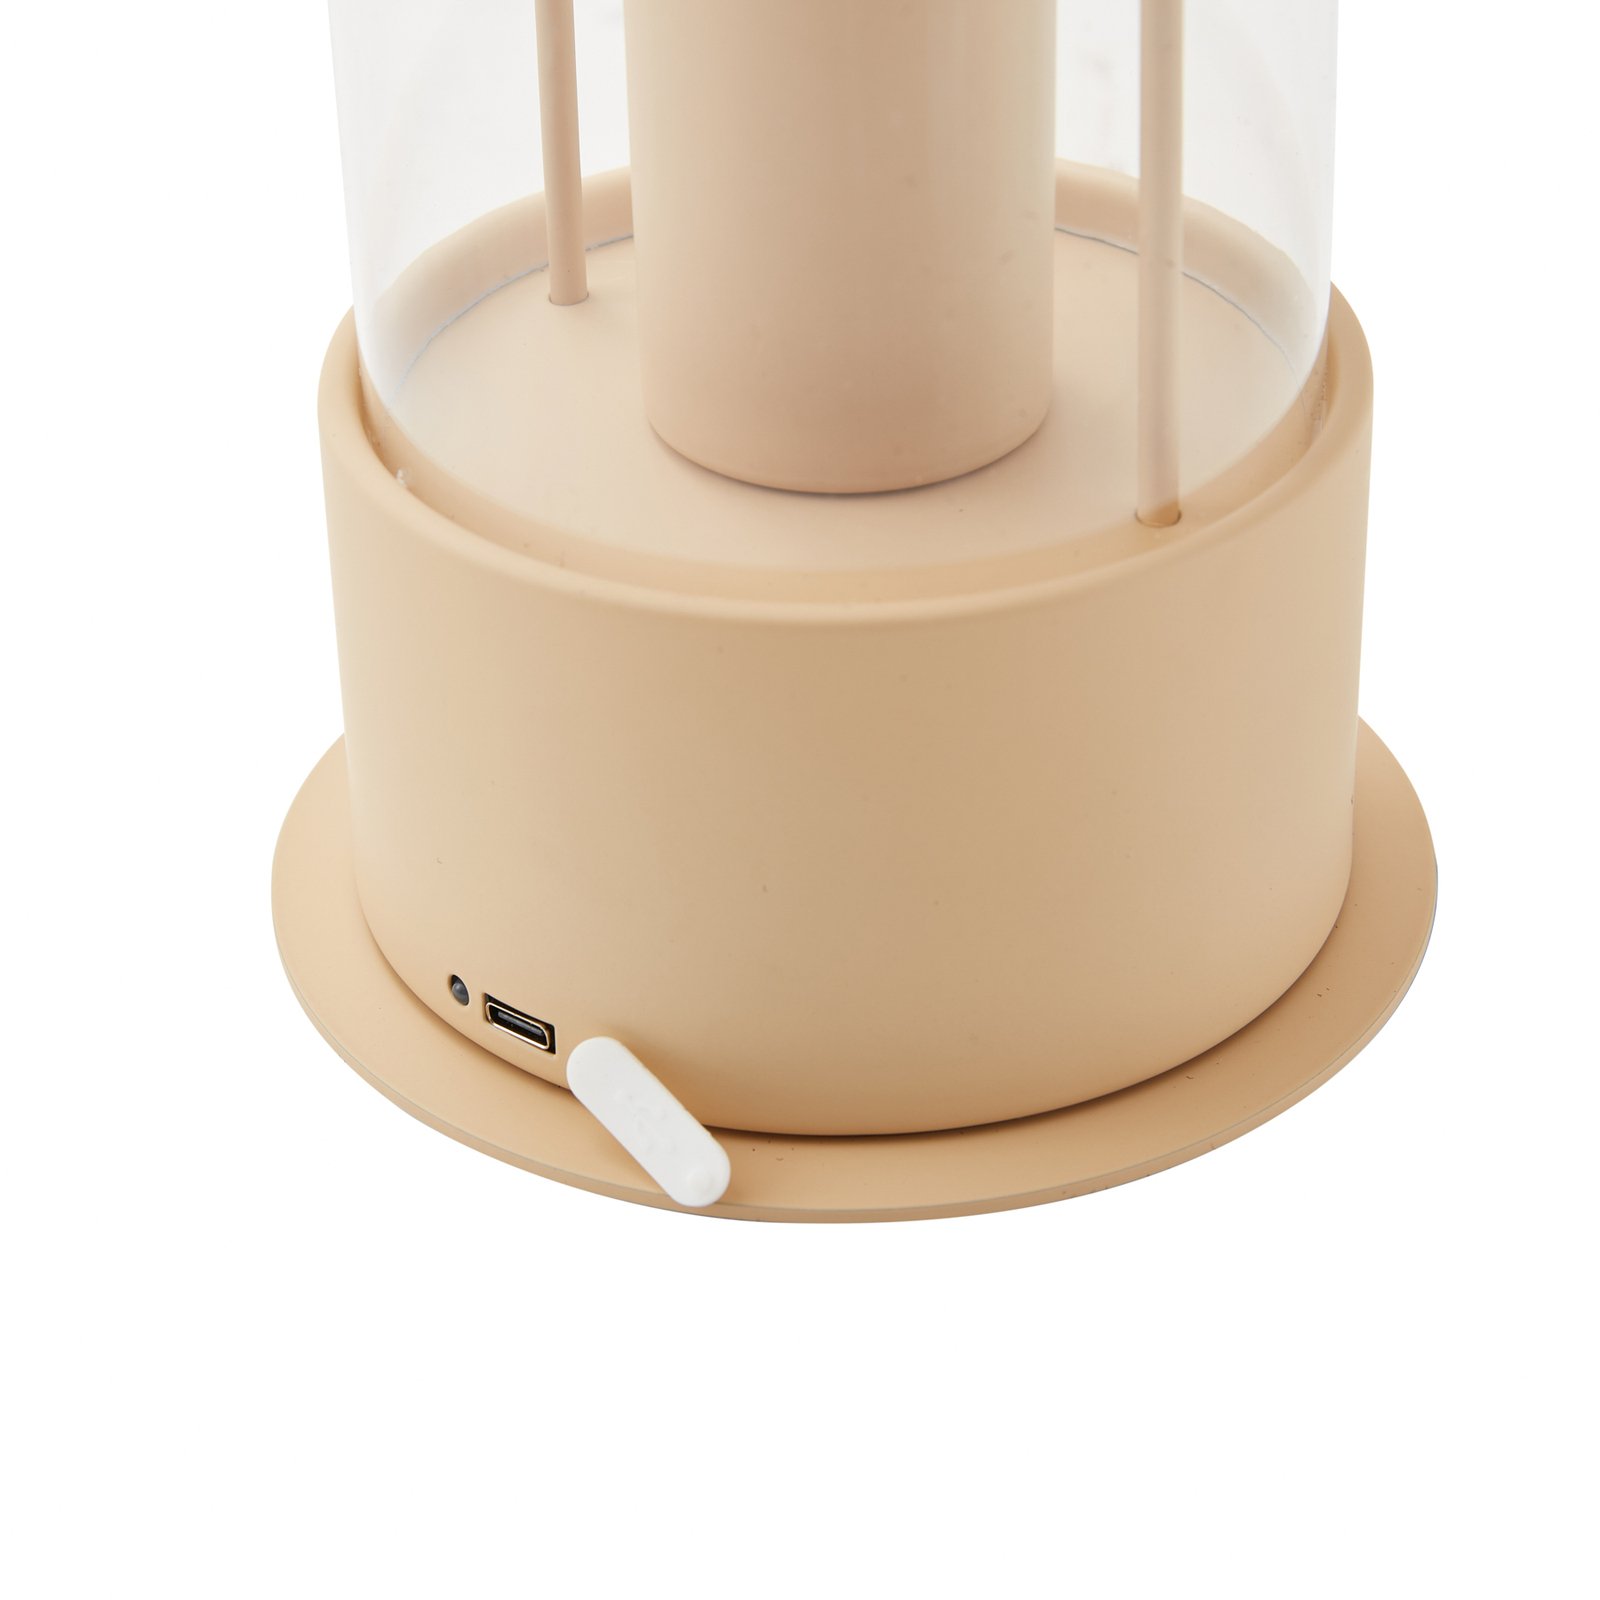 Lindby rechargeable table lamp Yvette, apricot, IP44, touch dimmer